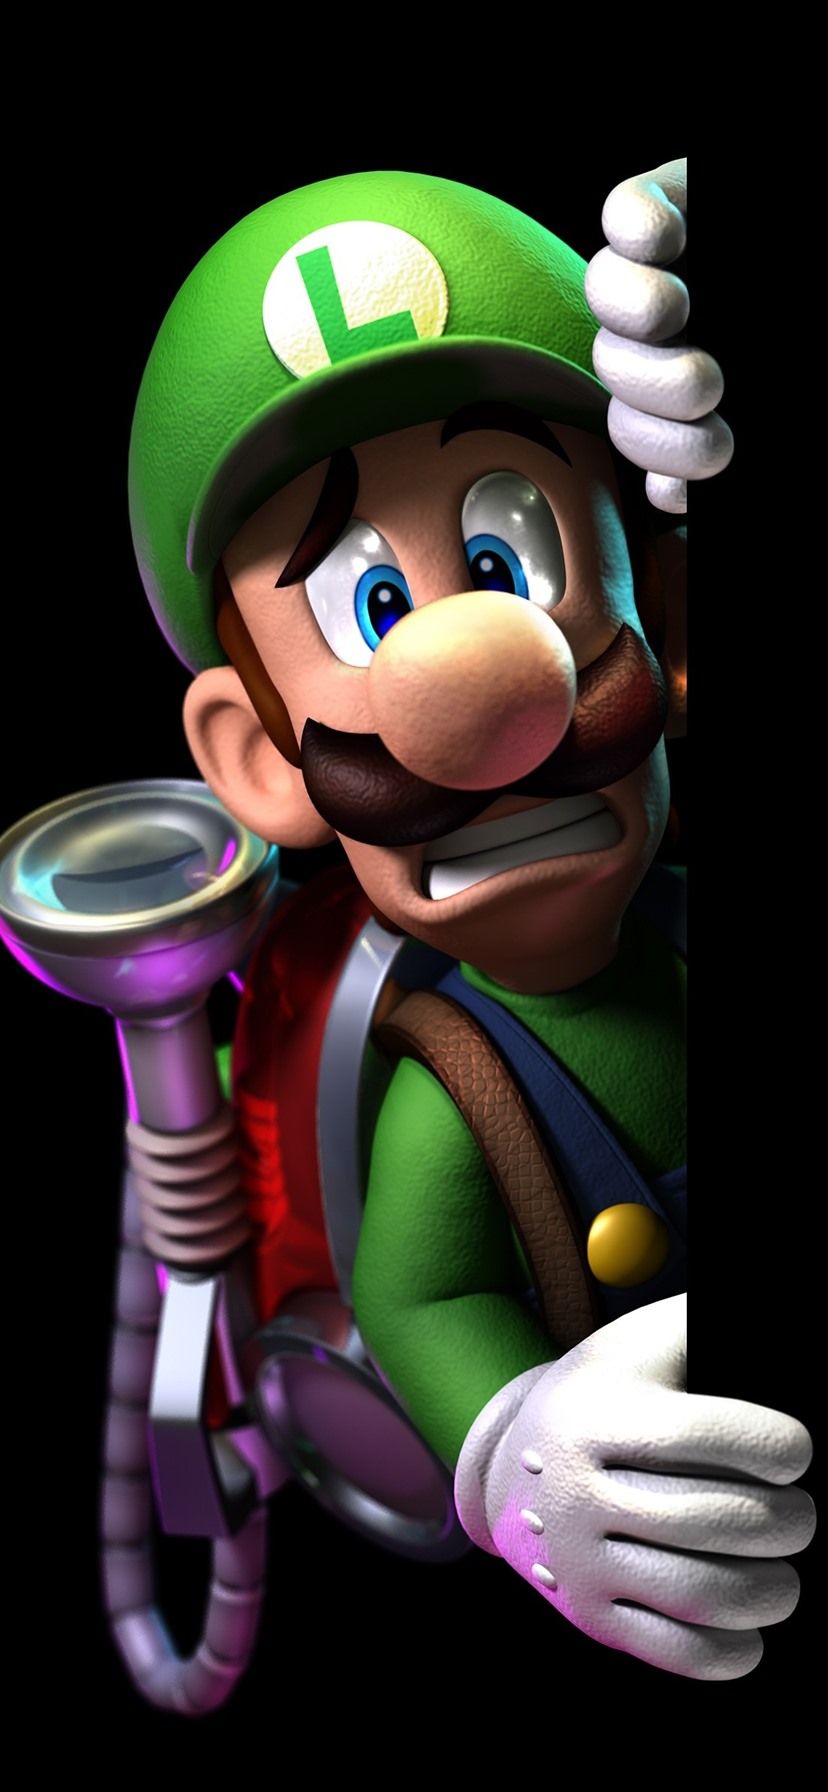 Mario, Video Game, Black Background 1080x1920 IPhone 8 7 6 6S Plus Wallpaper, Background, Picture, Image